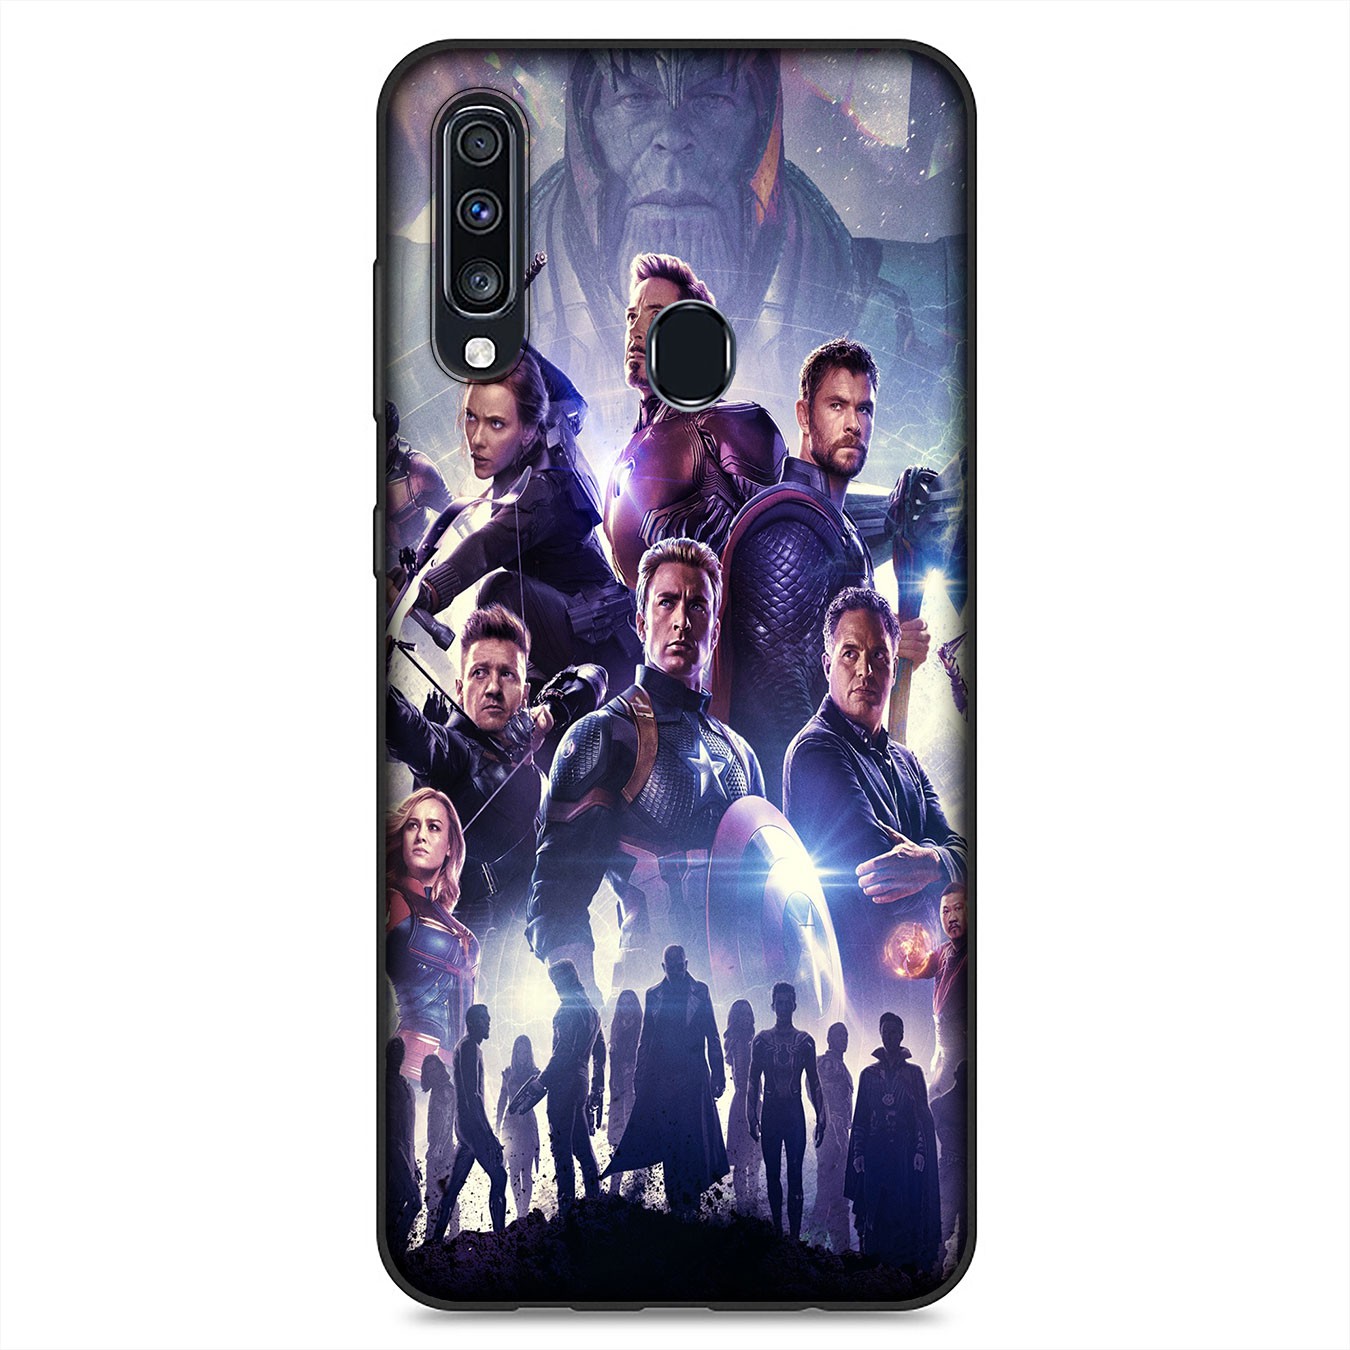 MARVEL Ốp Lưng Silicone Mềm In Hình Tom Holland Cho Xiaomi Redmi Note 8 / 6 Pro / 8t / 8a / 6a / 6pro / Note8 / Note6 / 8pro